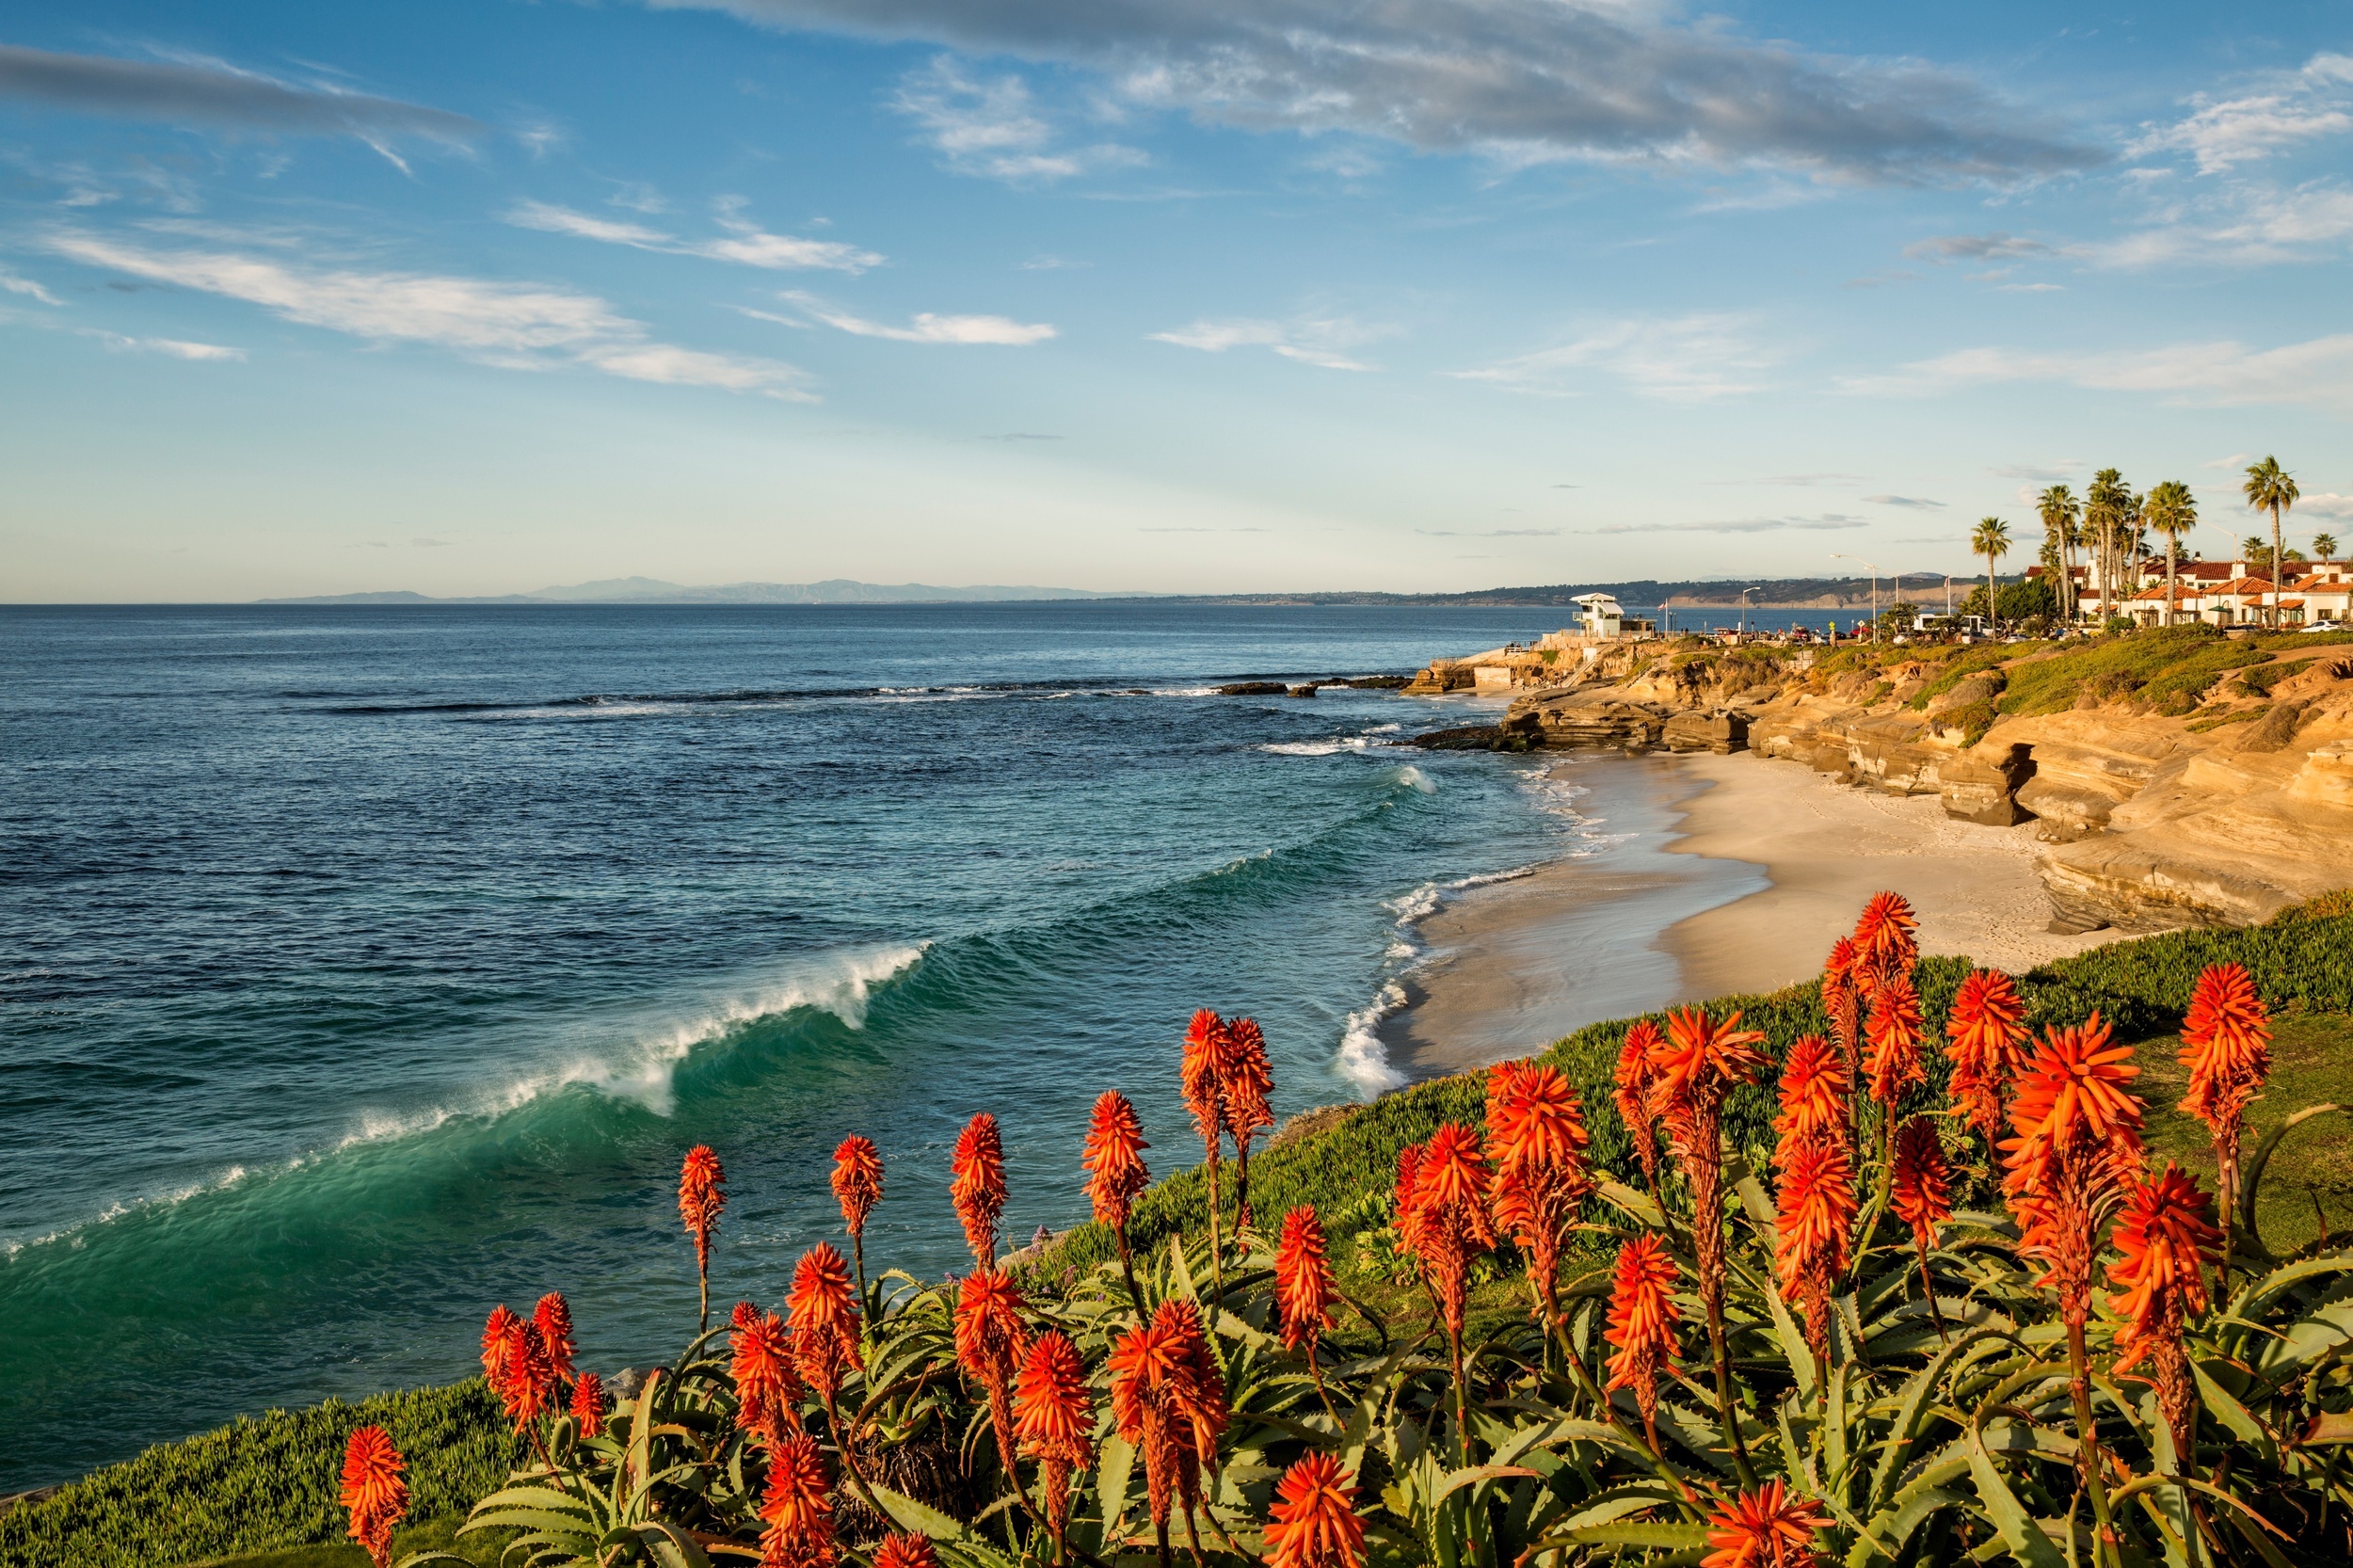 <p>Another popular domestic destination, San Diego has sun and sand throughout the year. And if you’re flying from somewhere in the West, it’s only a few hours away!</p><p>You may also like: <a href='https://www.yardbarker.com/lifestyle/articles/15_diy_holiday_gifts_that_wont_break_the_bank_121523/s1__39624140'>15 DIY holiday gifts that won't break the bank</a></p>